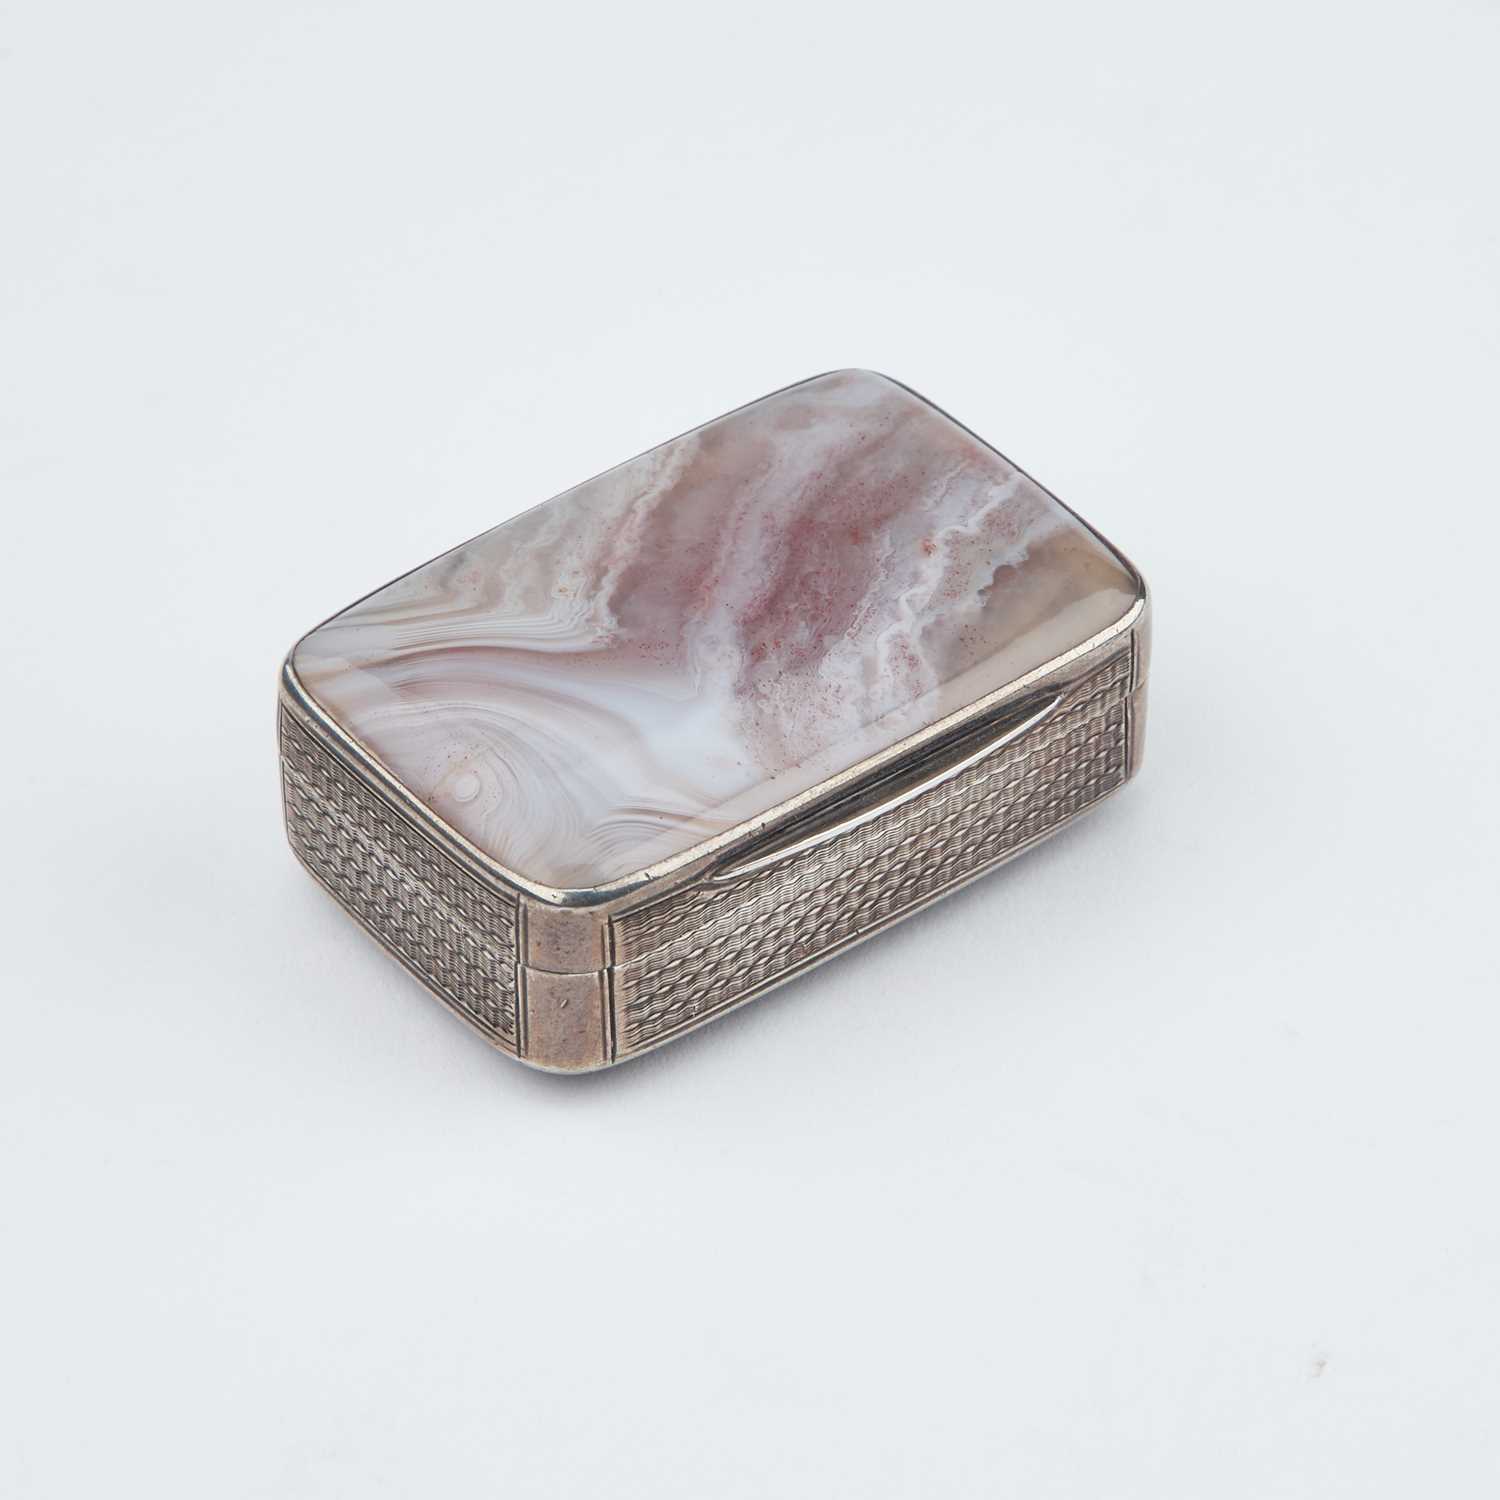 A GEORGE IV SILVER AND AGATE VINAIGRETTE - Image 2 of 2